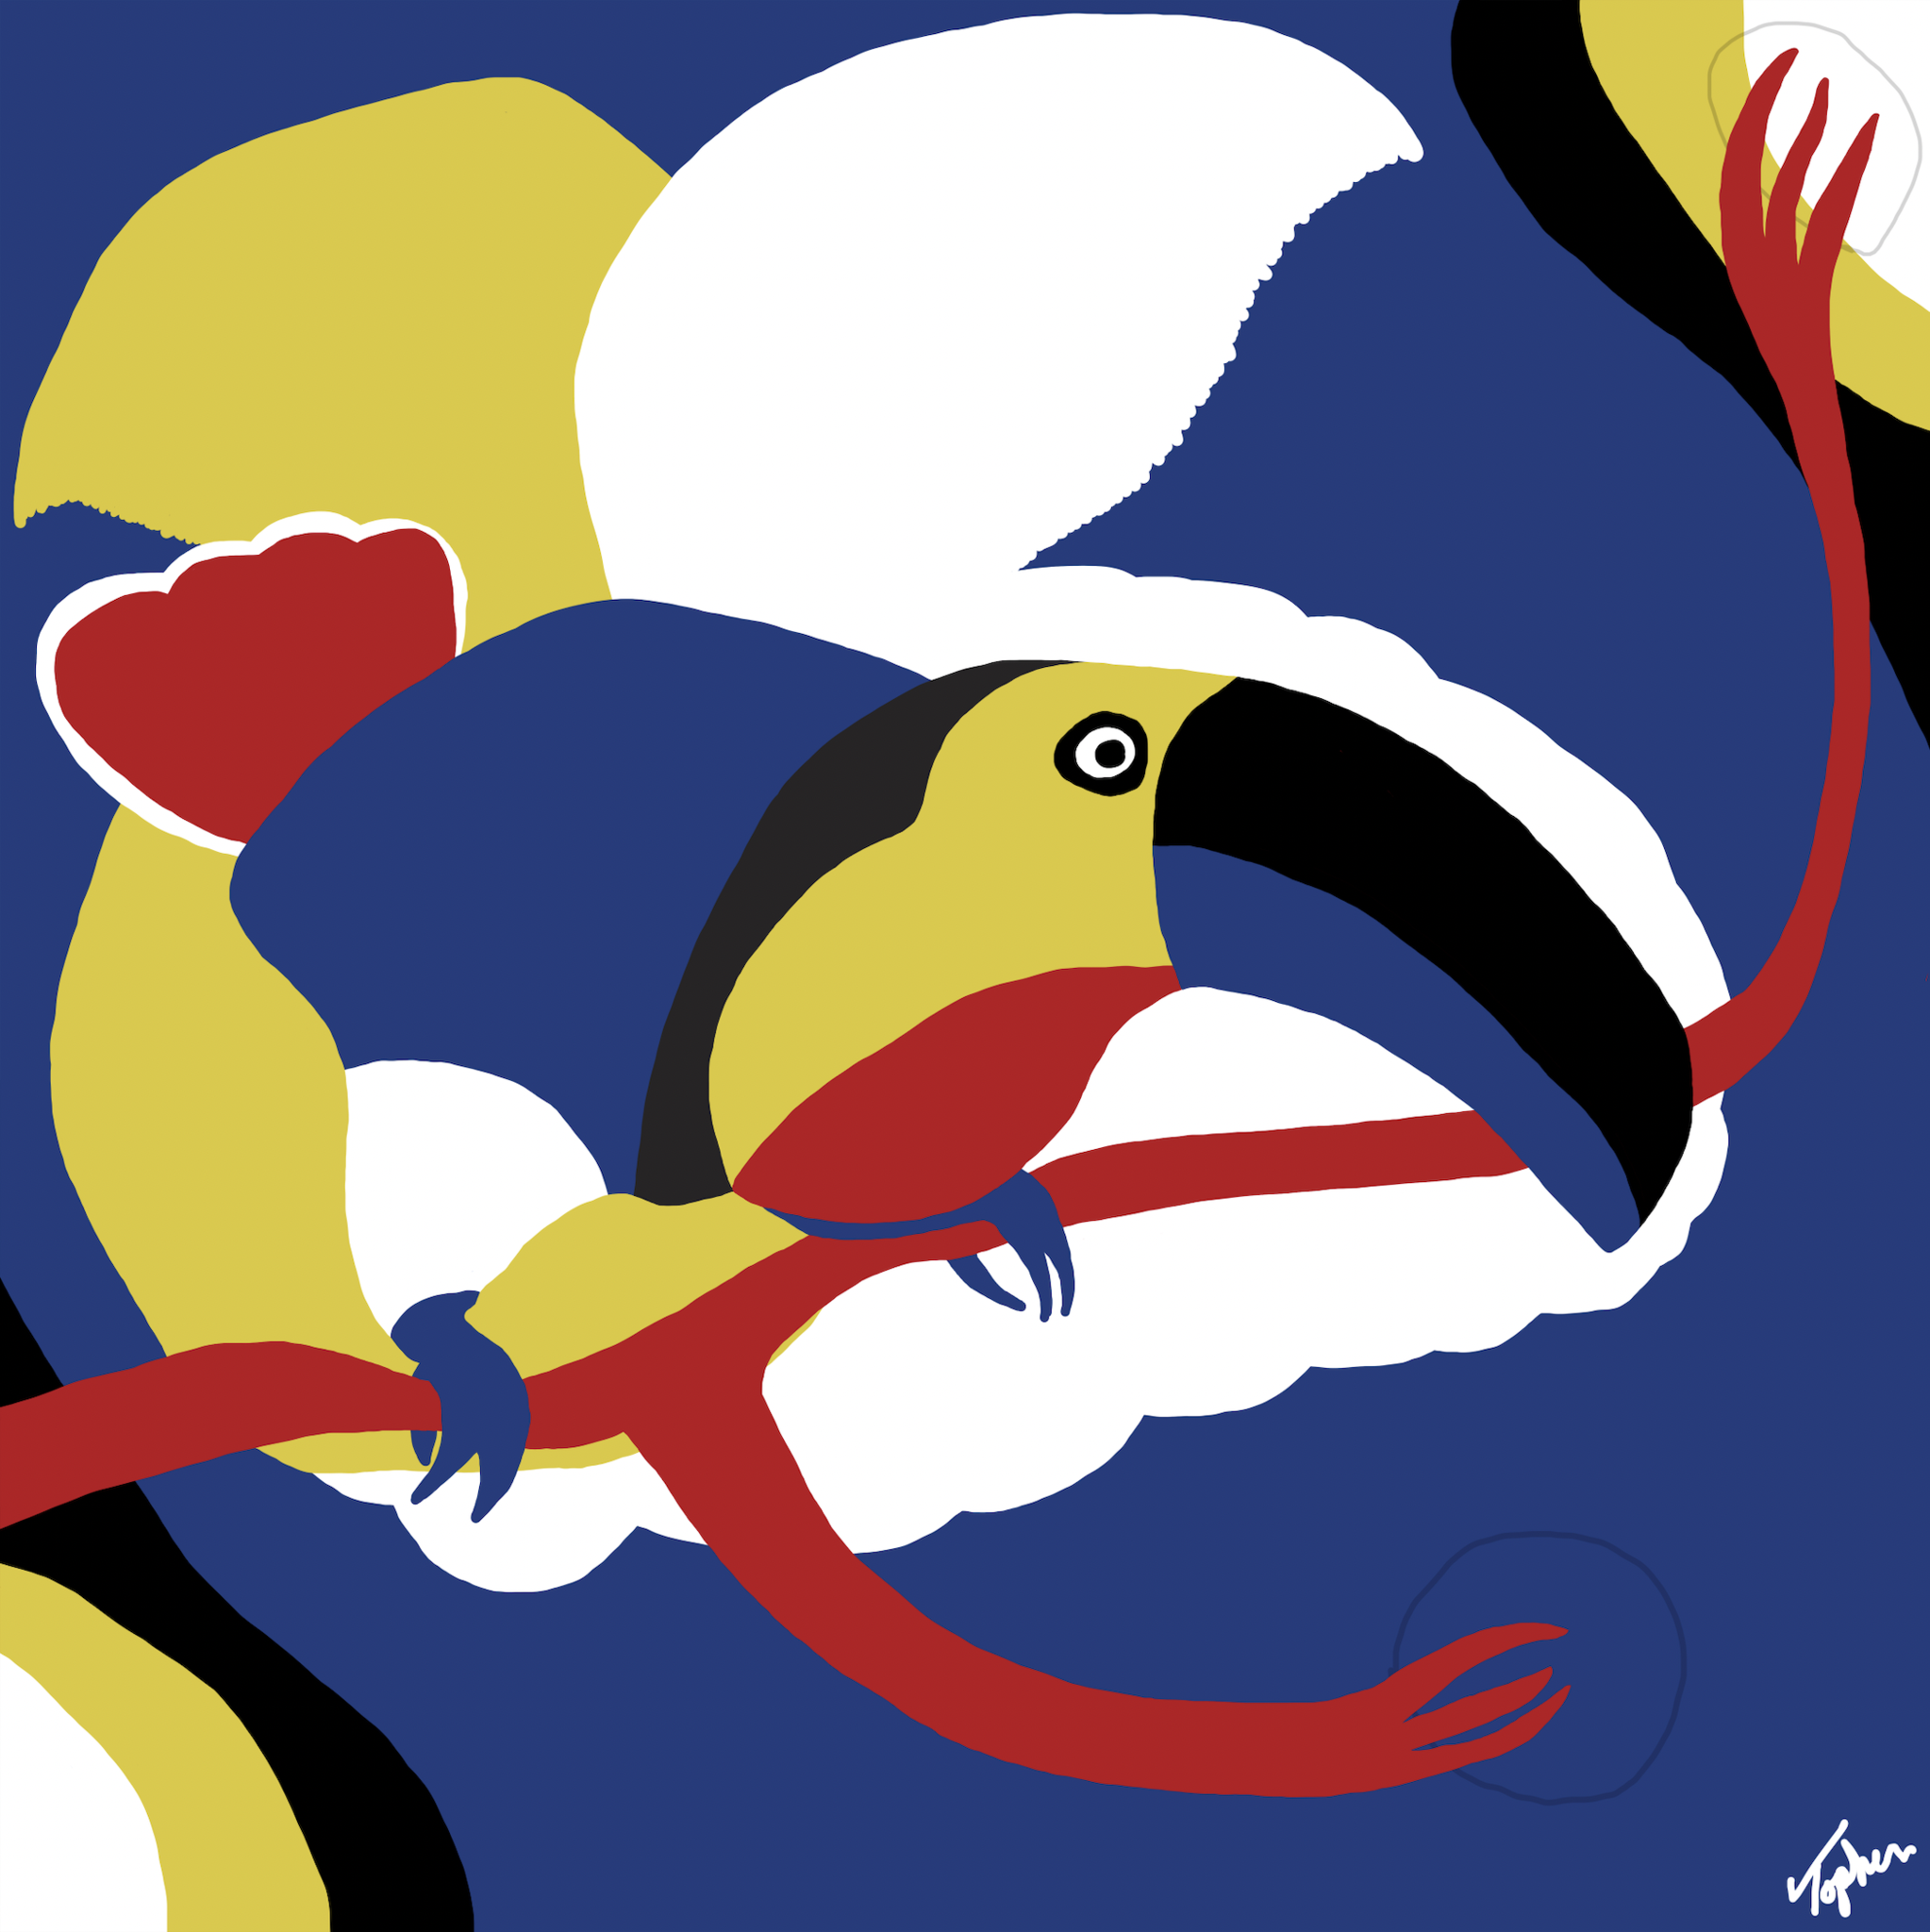 Toucan, Modern Figurative Expressionist Painting, 2020, Ltd Ed